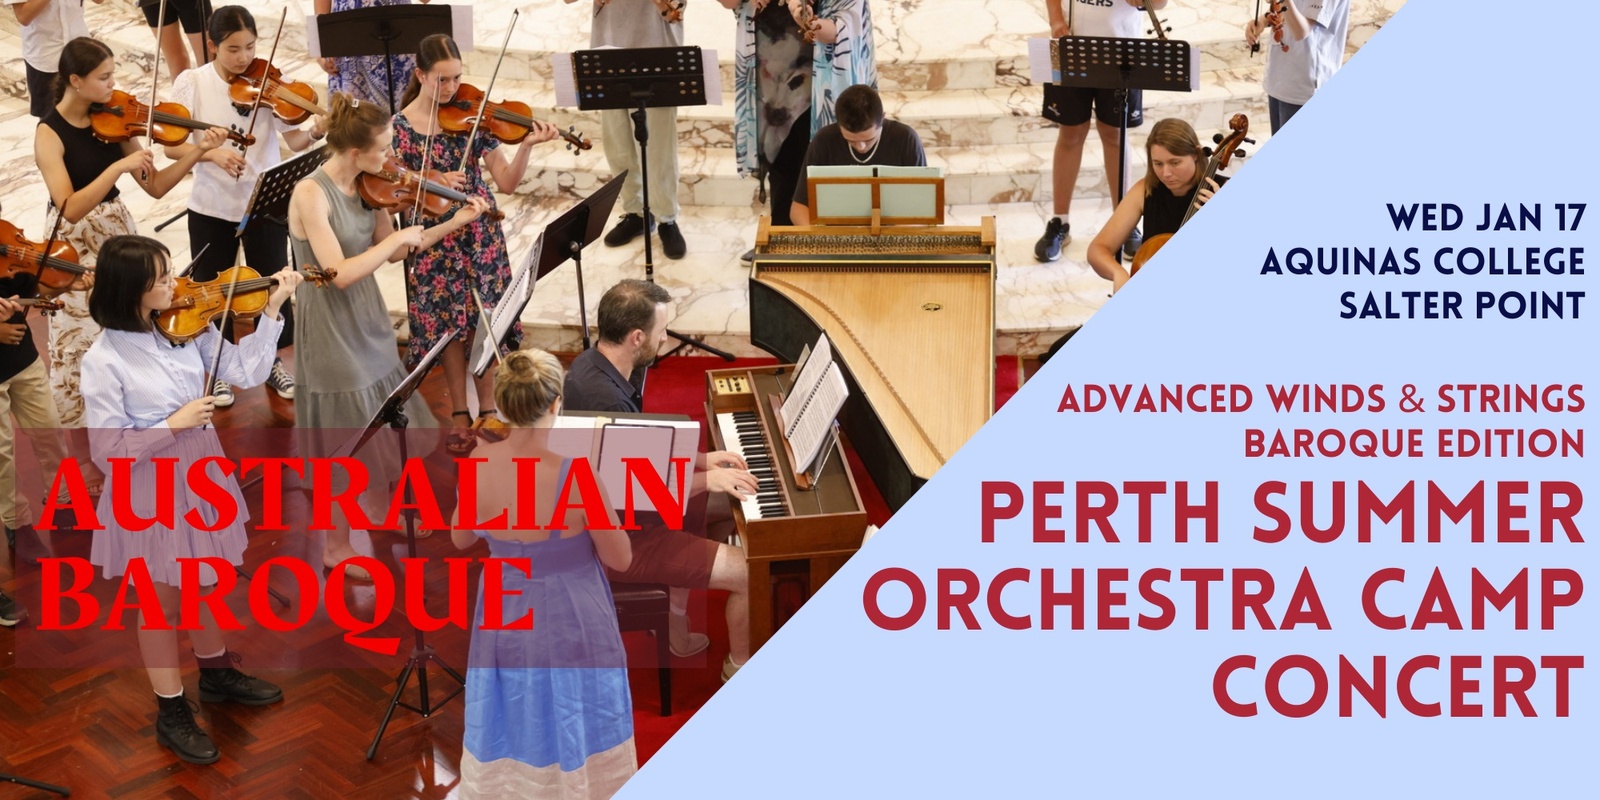 Banner image for PERTH SUMMER ORCHESTRA CAMP CONCERT - Advanced Strings & Winds BAROQUE edition 